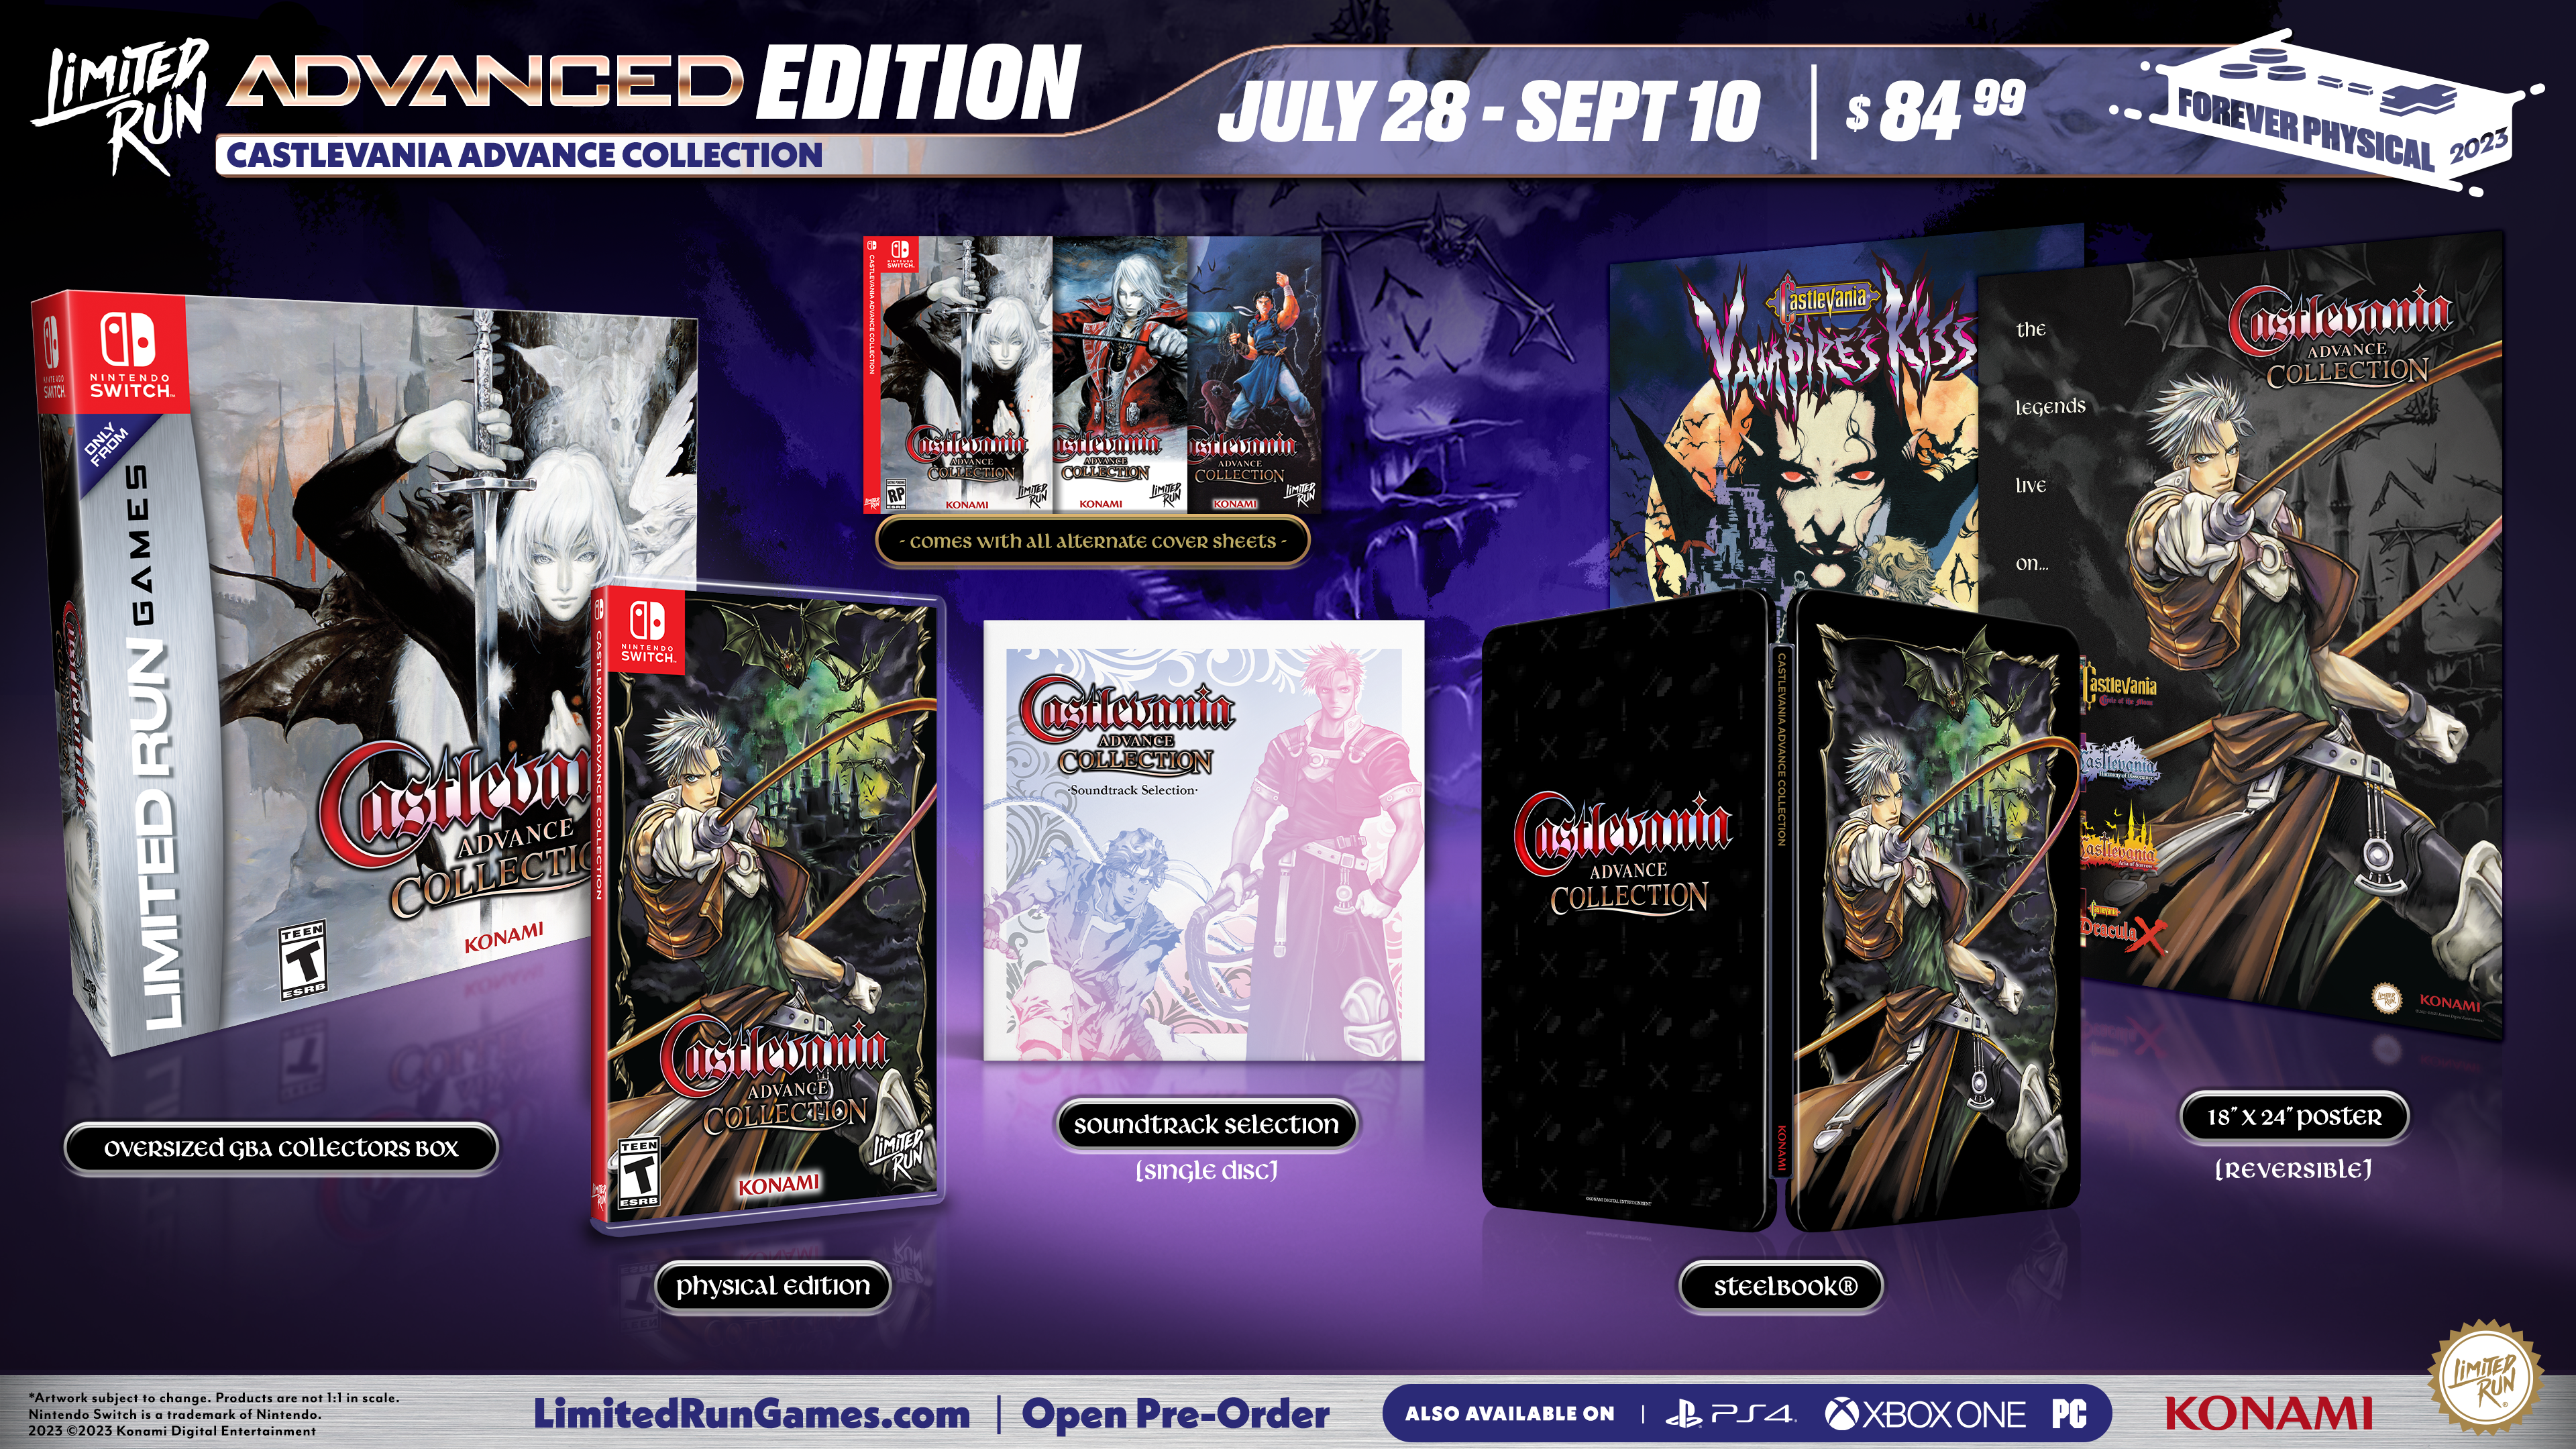 Castlevania Advance Collection Advanced Edition (limited Run Games) - Switch